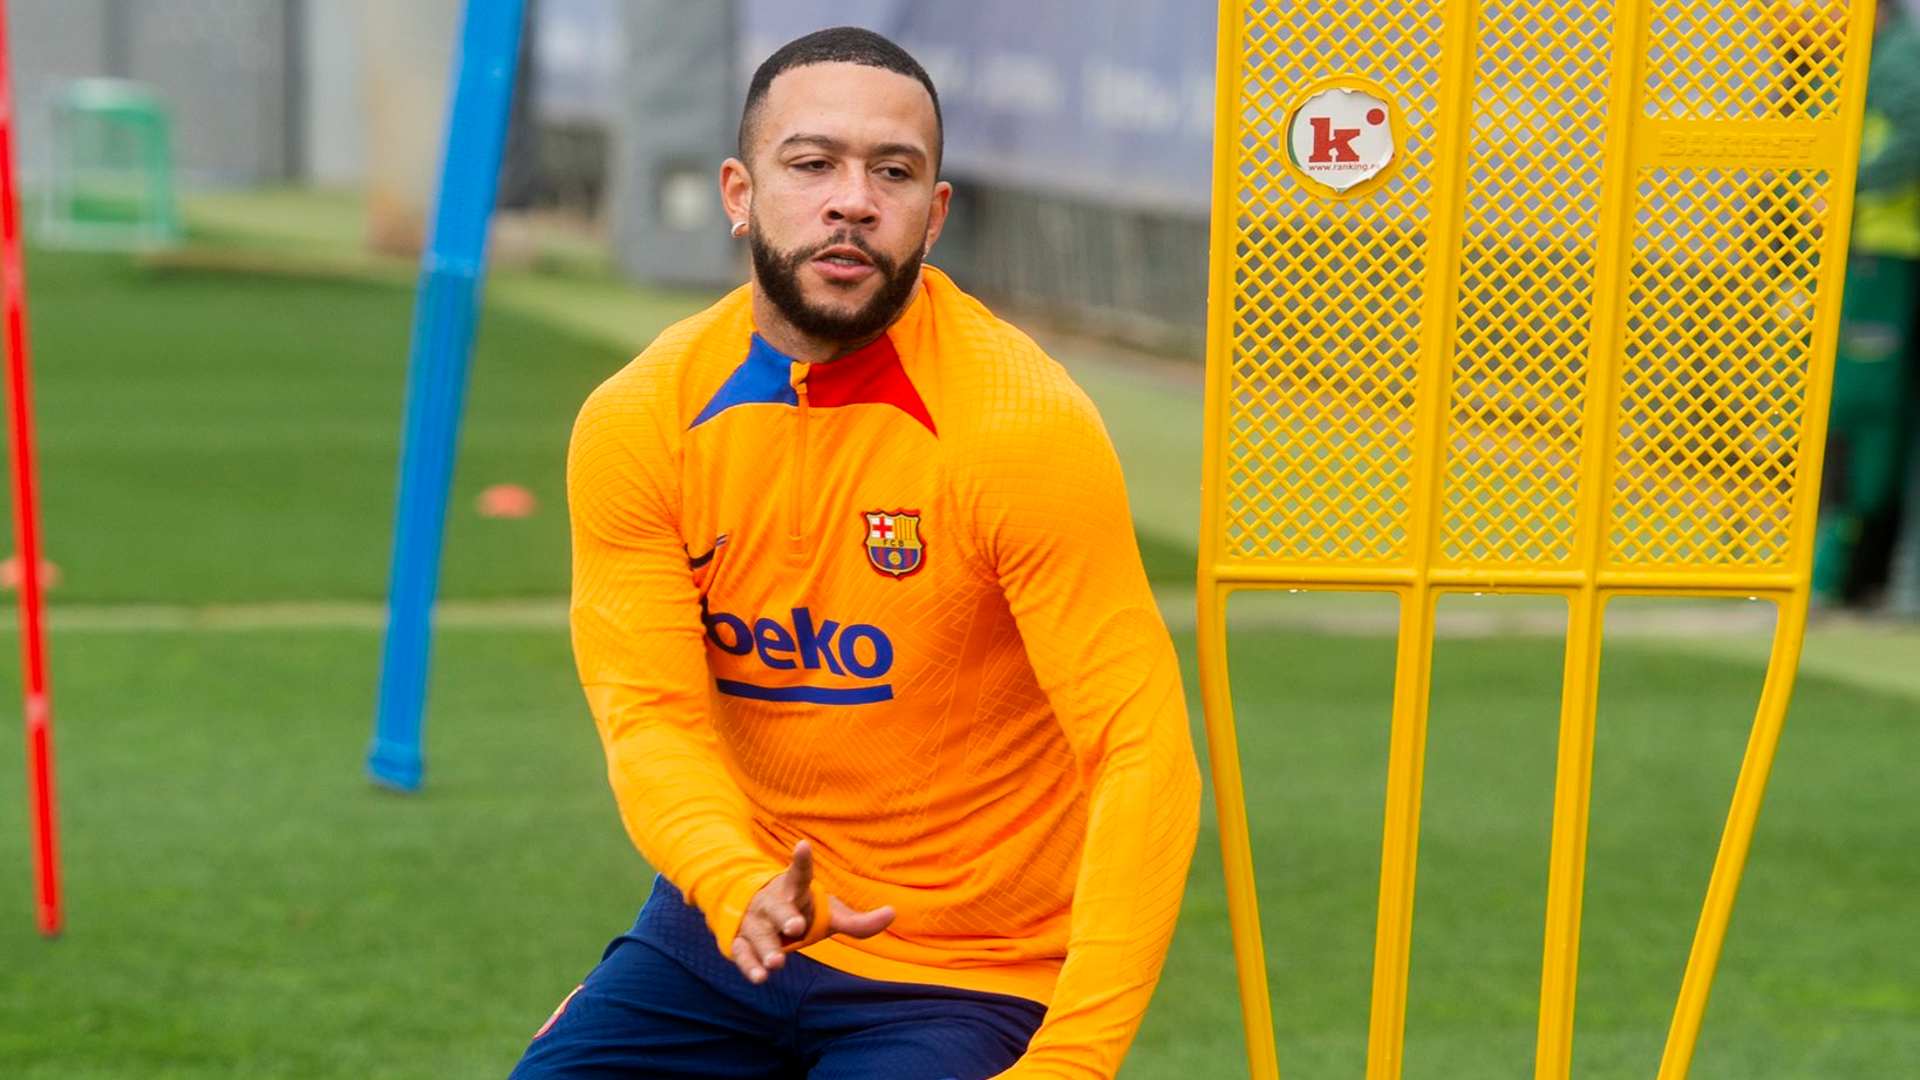 Football Wags — LEAST FASHIONABLE PLAYER 2019: Memphis Depay